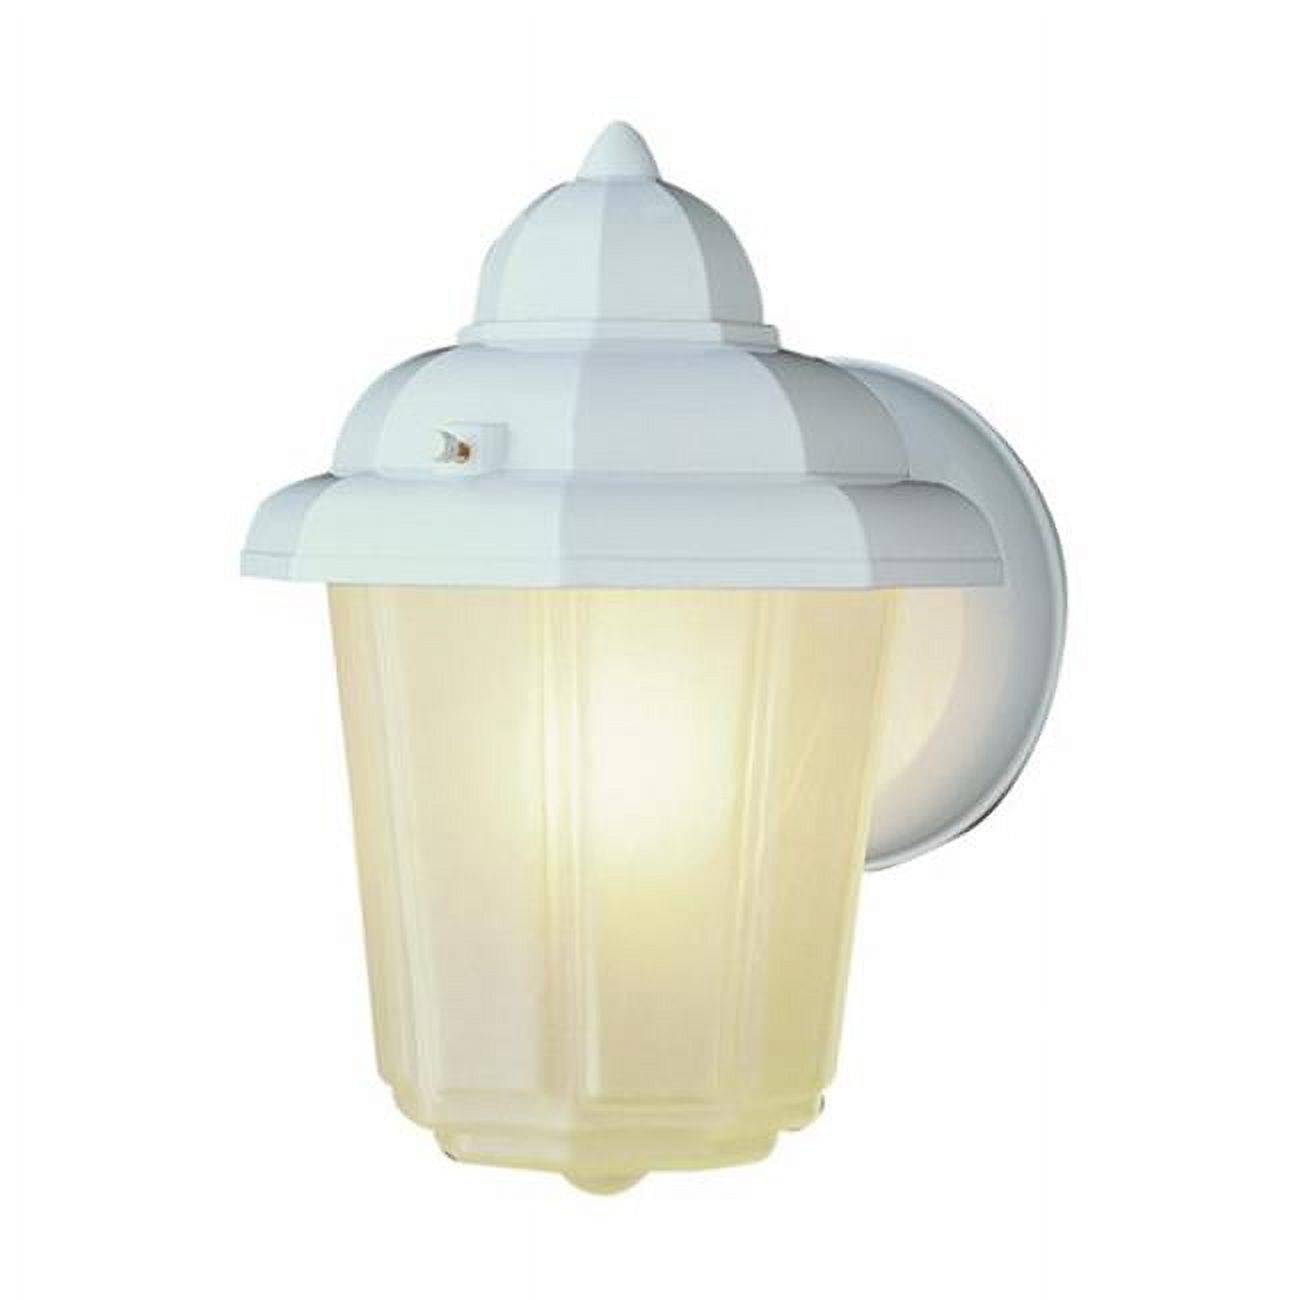 Dale Collection White Switch Incandescent Wall Lantern - image 1 of 1